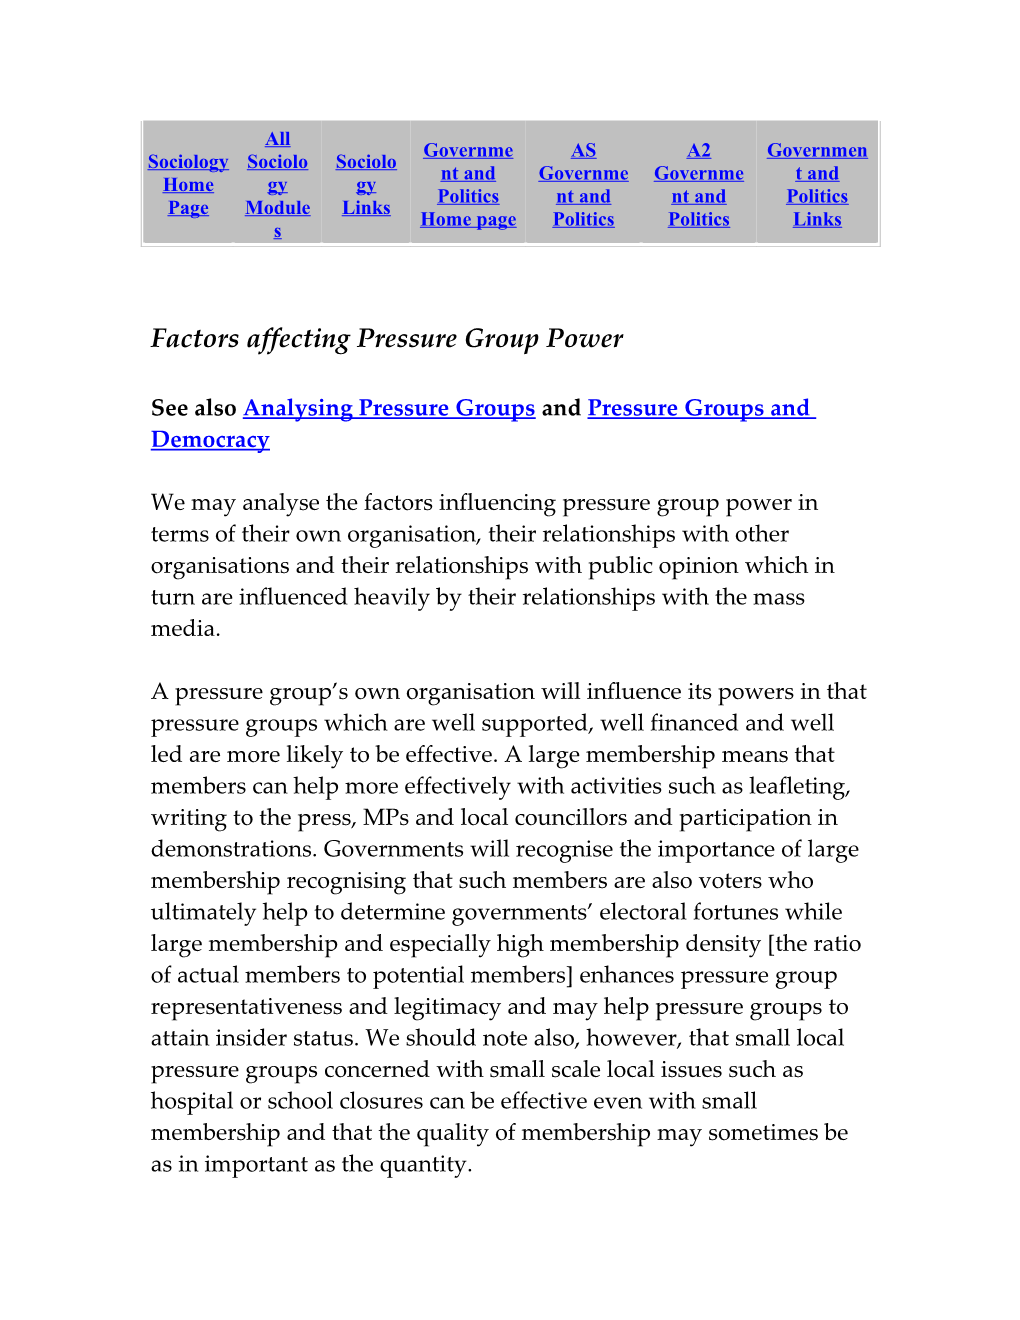 Factors Affecting Pressure Group Power